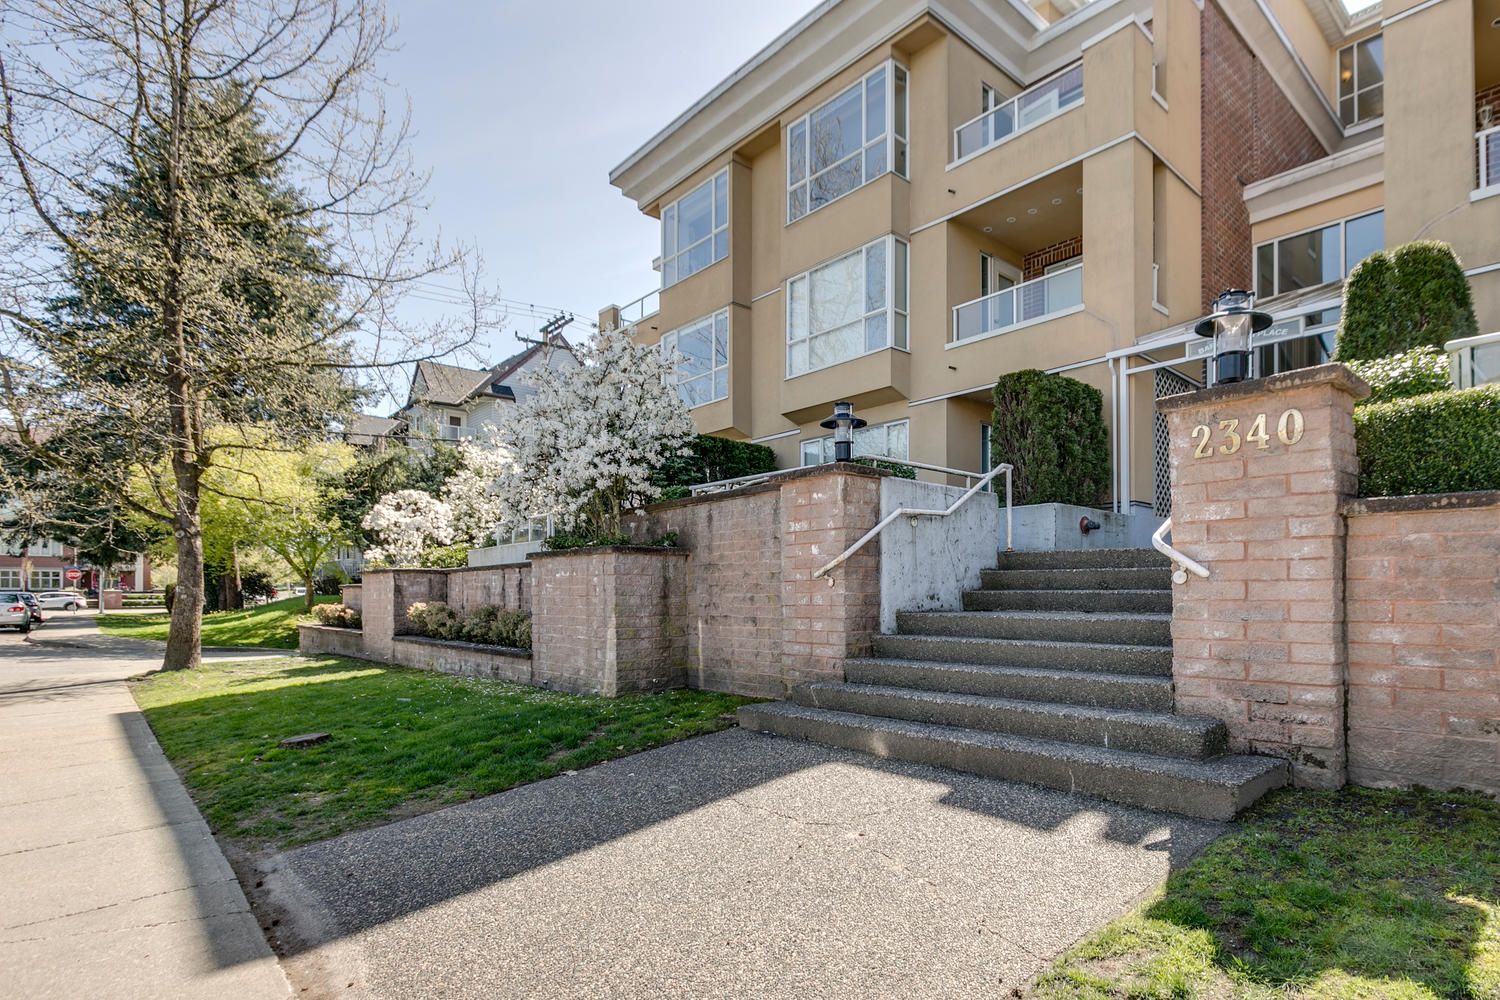 Another Ken & Jane "Sold But Not Forgotten" home at 102 2340 HAWTHORNE AVE in Port Coquitlam